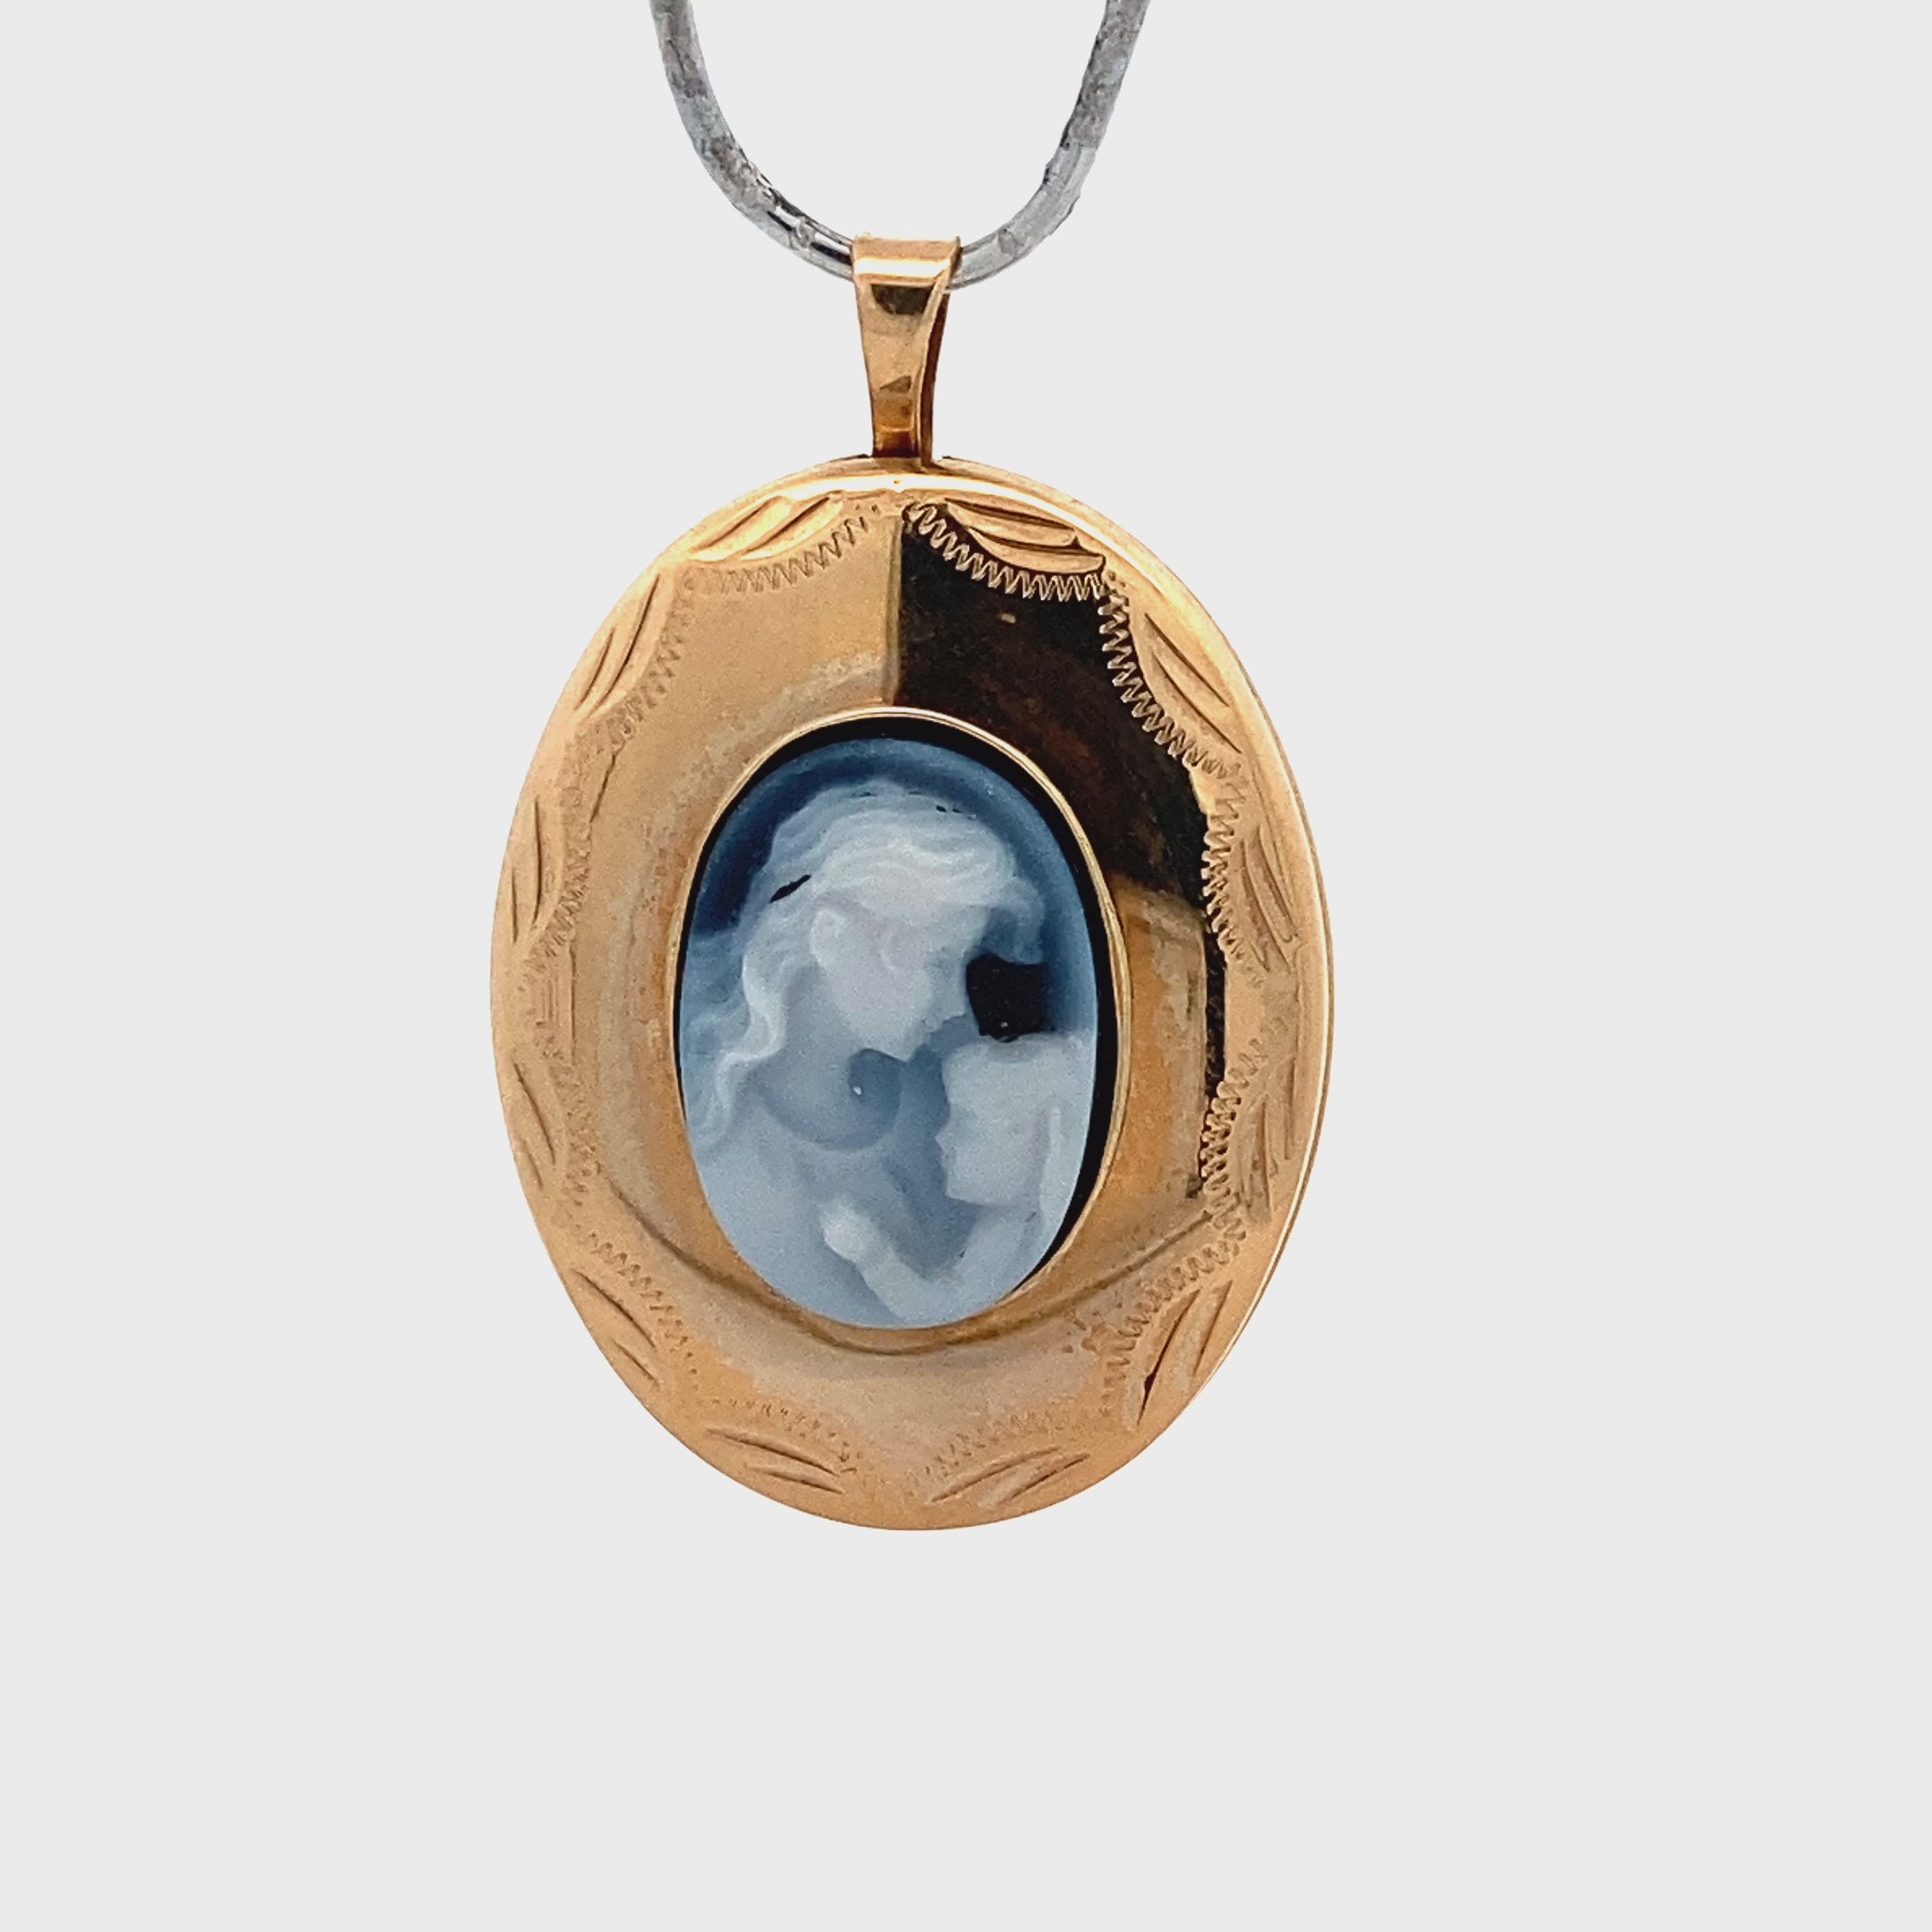 10K Yellow Gold Cameo Locket Pendant - Carrying Mother Holding Child